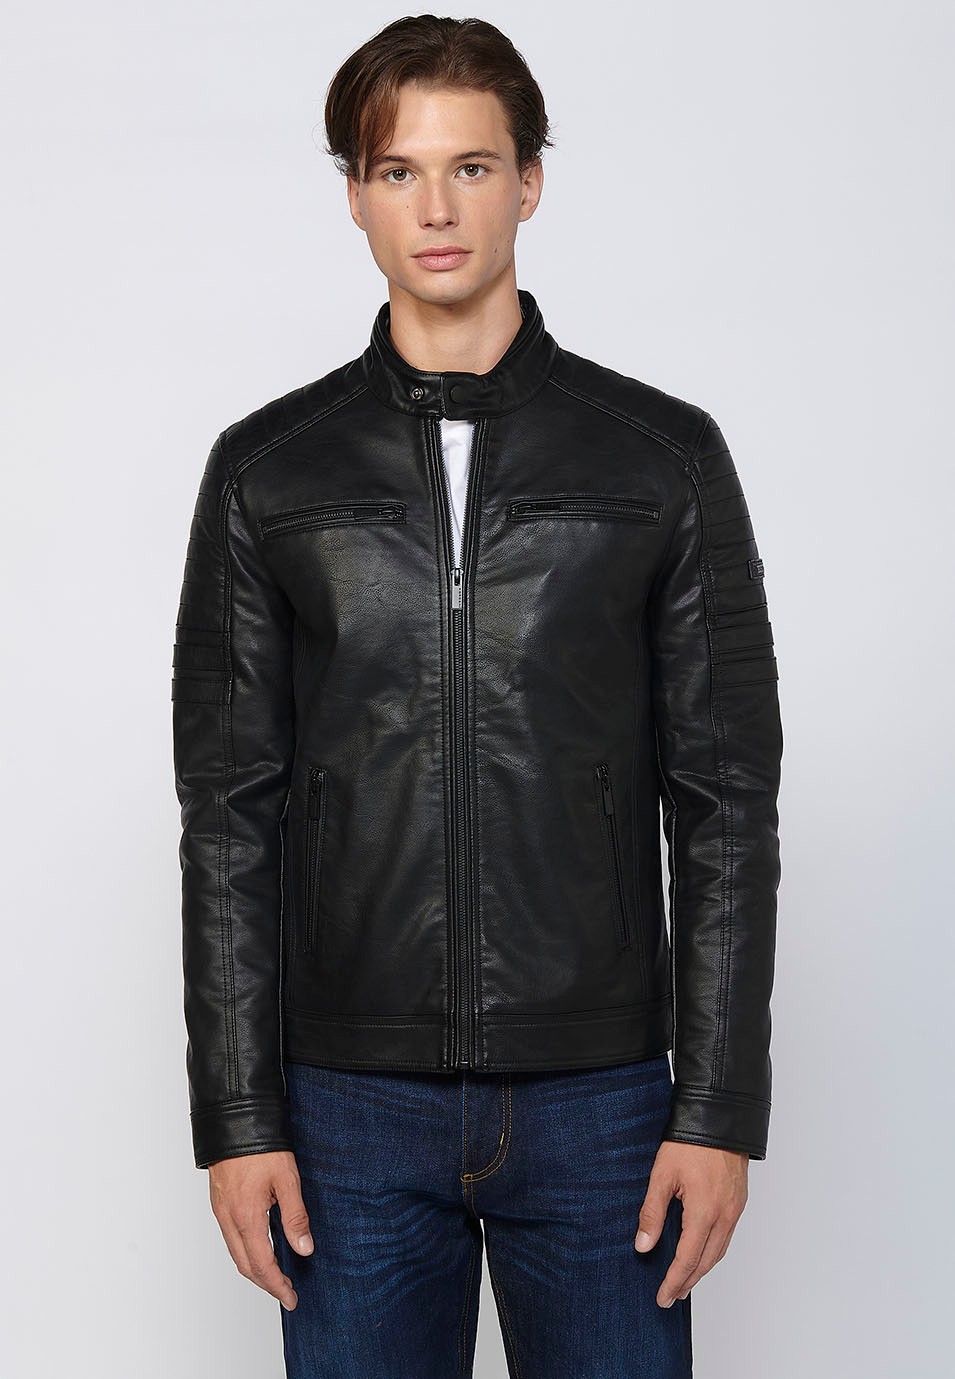 Long-sleeved jacket with round neck and details on the shoulders and arms in Black for Men